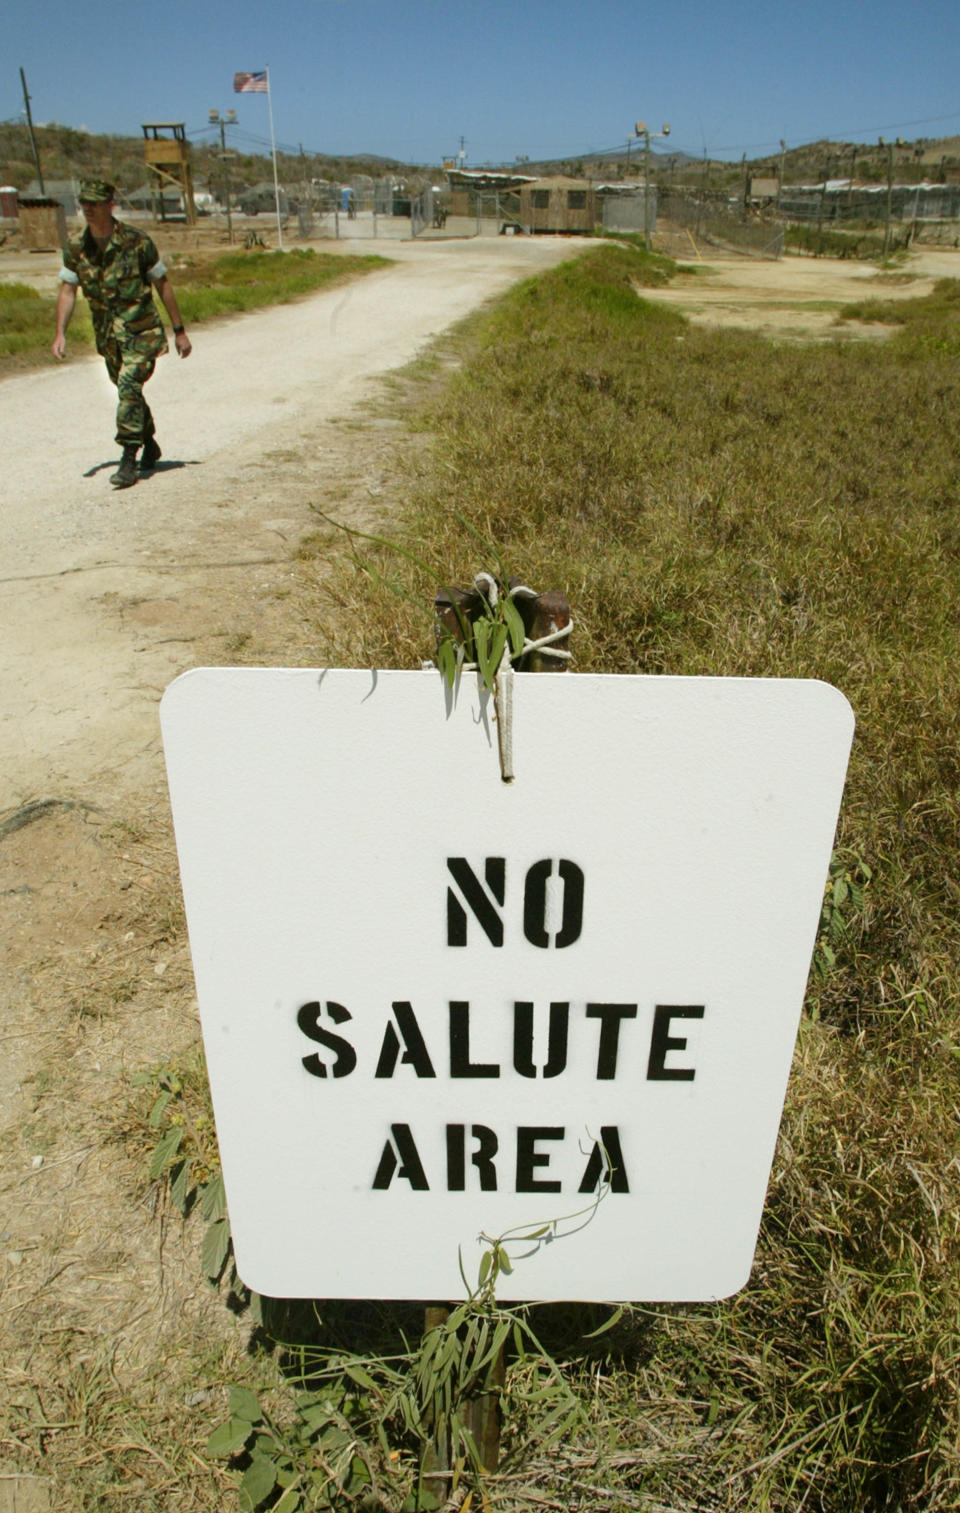 A soldier walks past a "No Salute Area" sign, posted to keep the ranks of military officers secret from detainees, at Camp X-Ray April 24, 2002 in Guantanamo Bay, Cuba. Some 300 alleged Taliban and al Qaeda detainees have been brought to Camp X-Ray from Kandahar, Afghanistan. The detainees will soon be moved to Camp Delta which is expected to be finished within days. (Photo by Mario Tama/Getty Images)